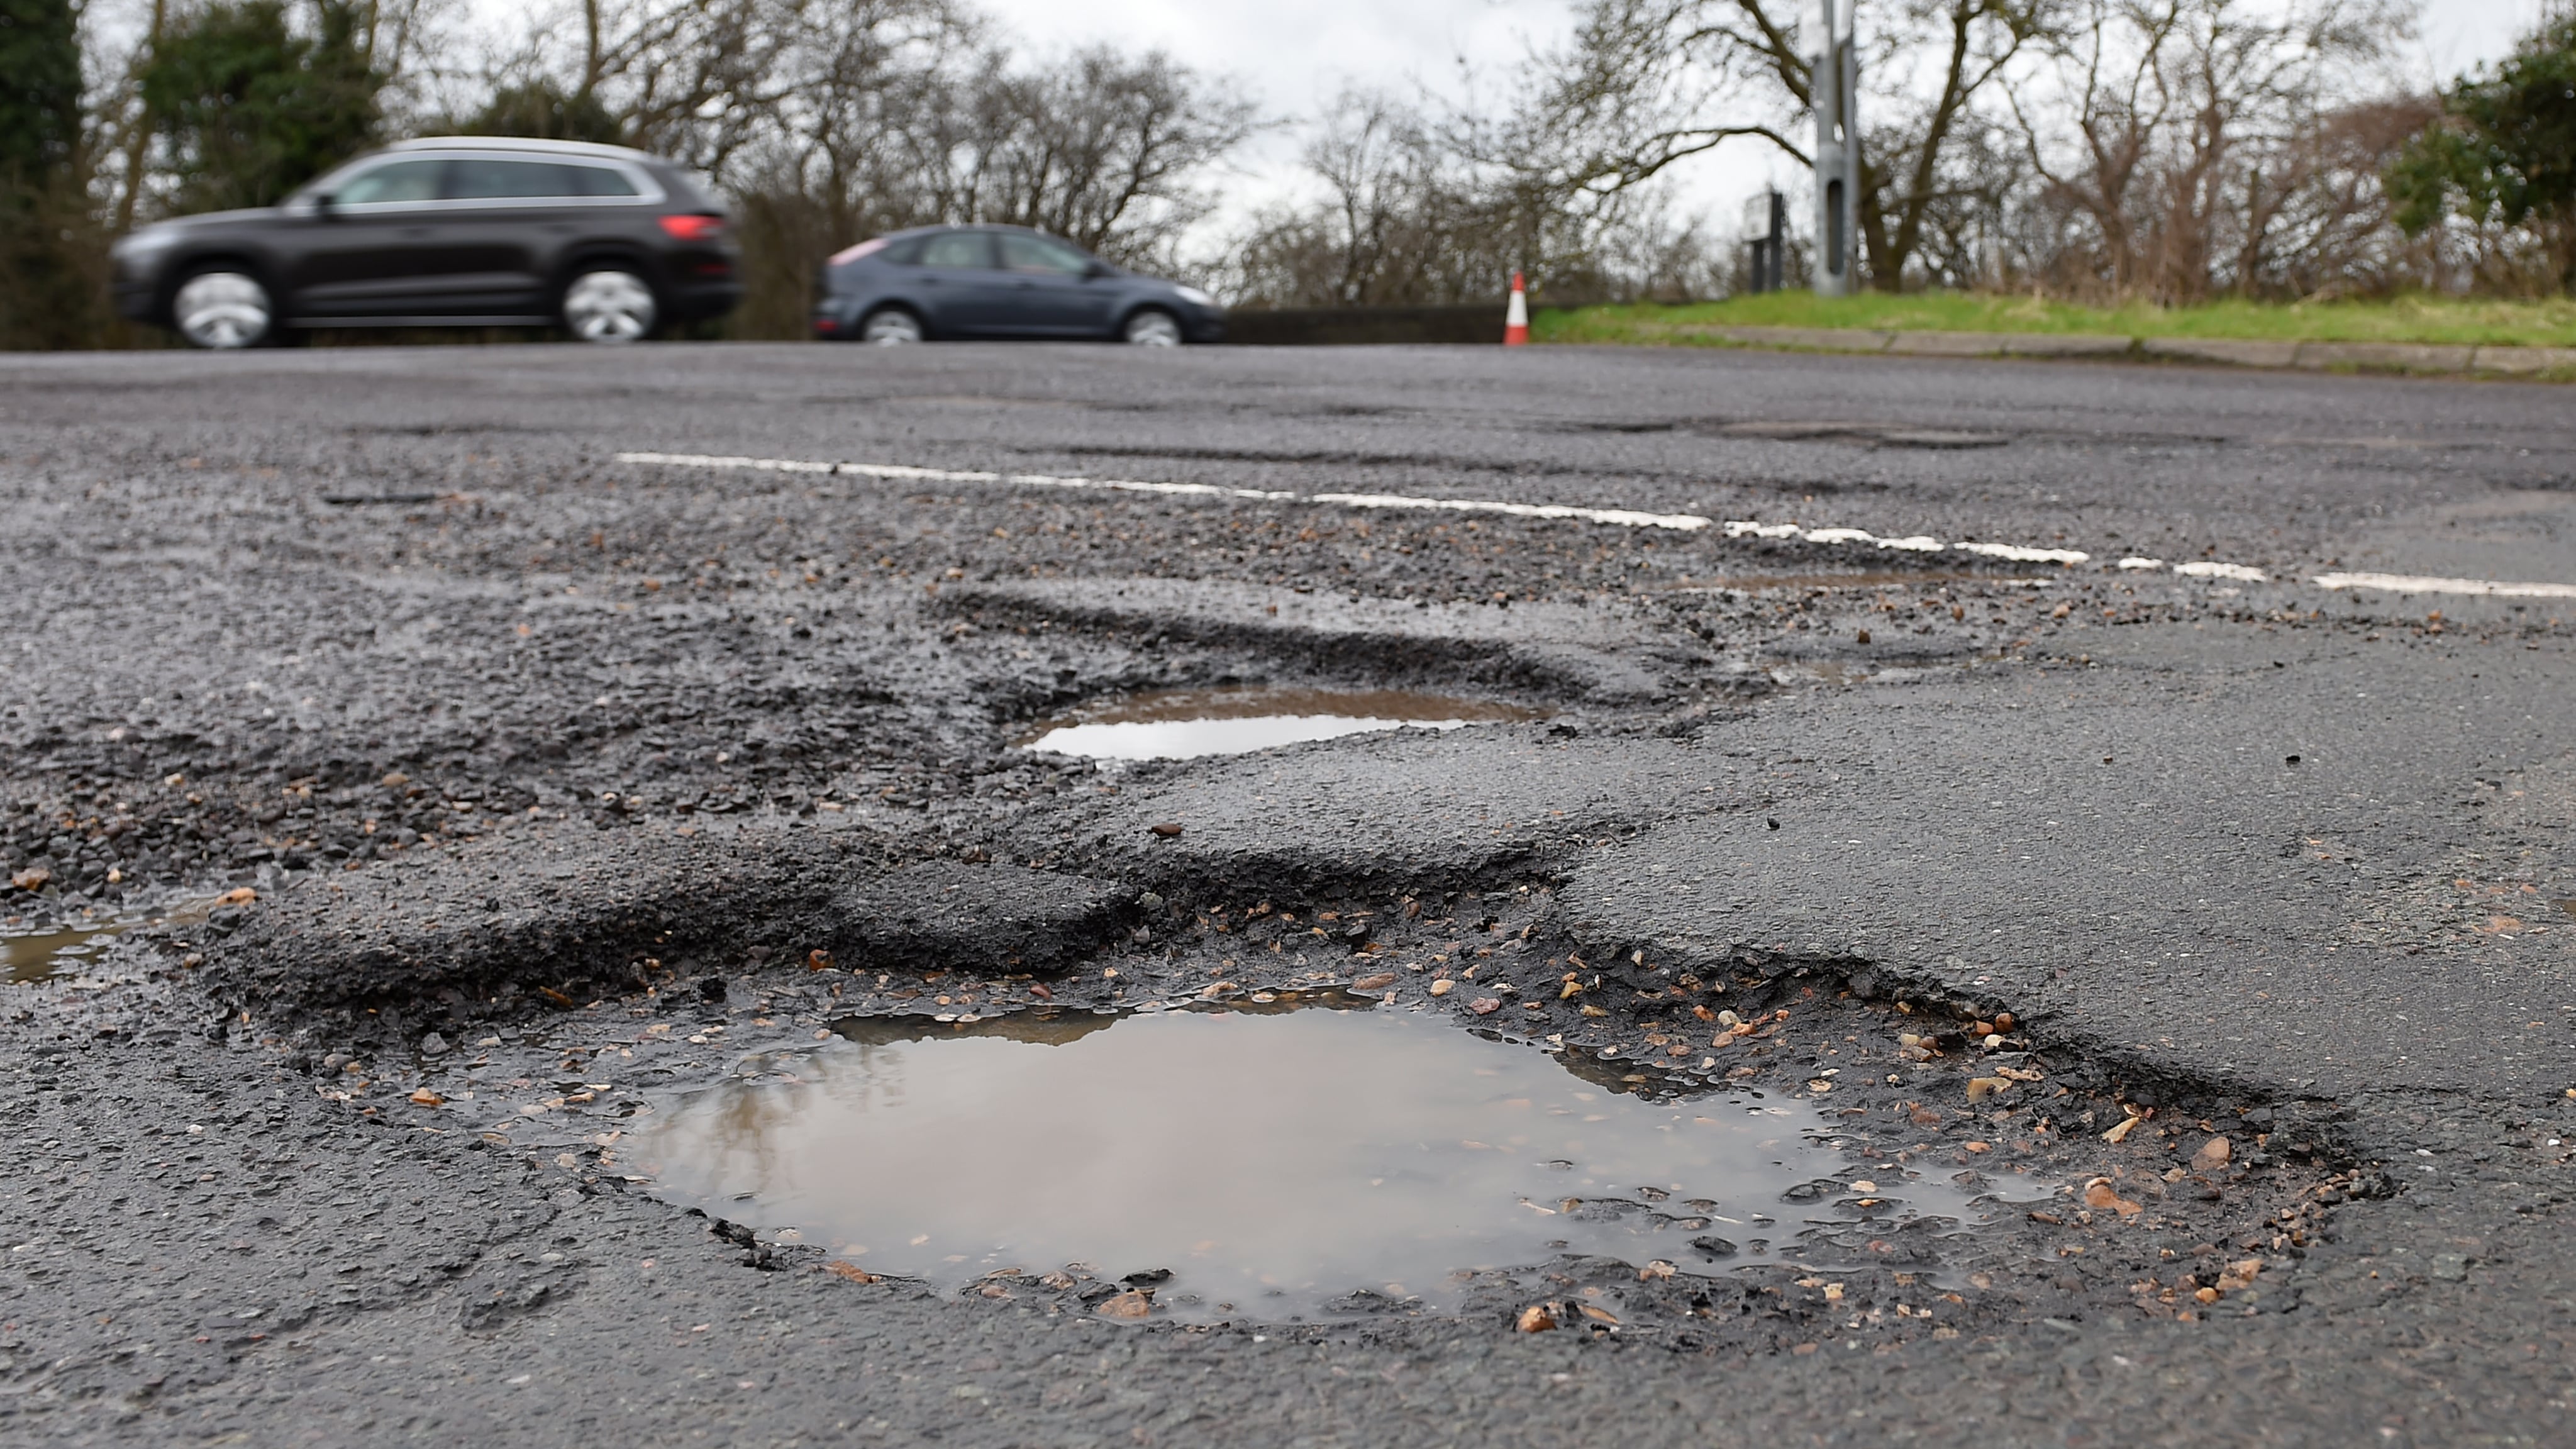 The Liberal Democrats have pledged to fix 1.2 million potholes a year